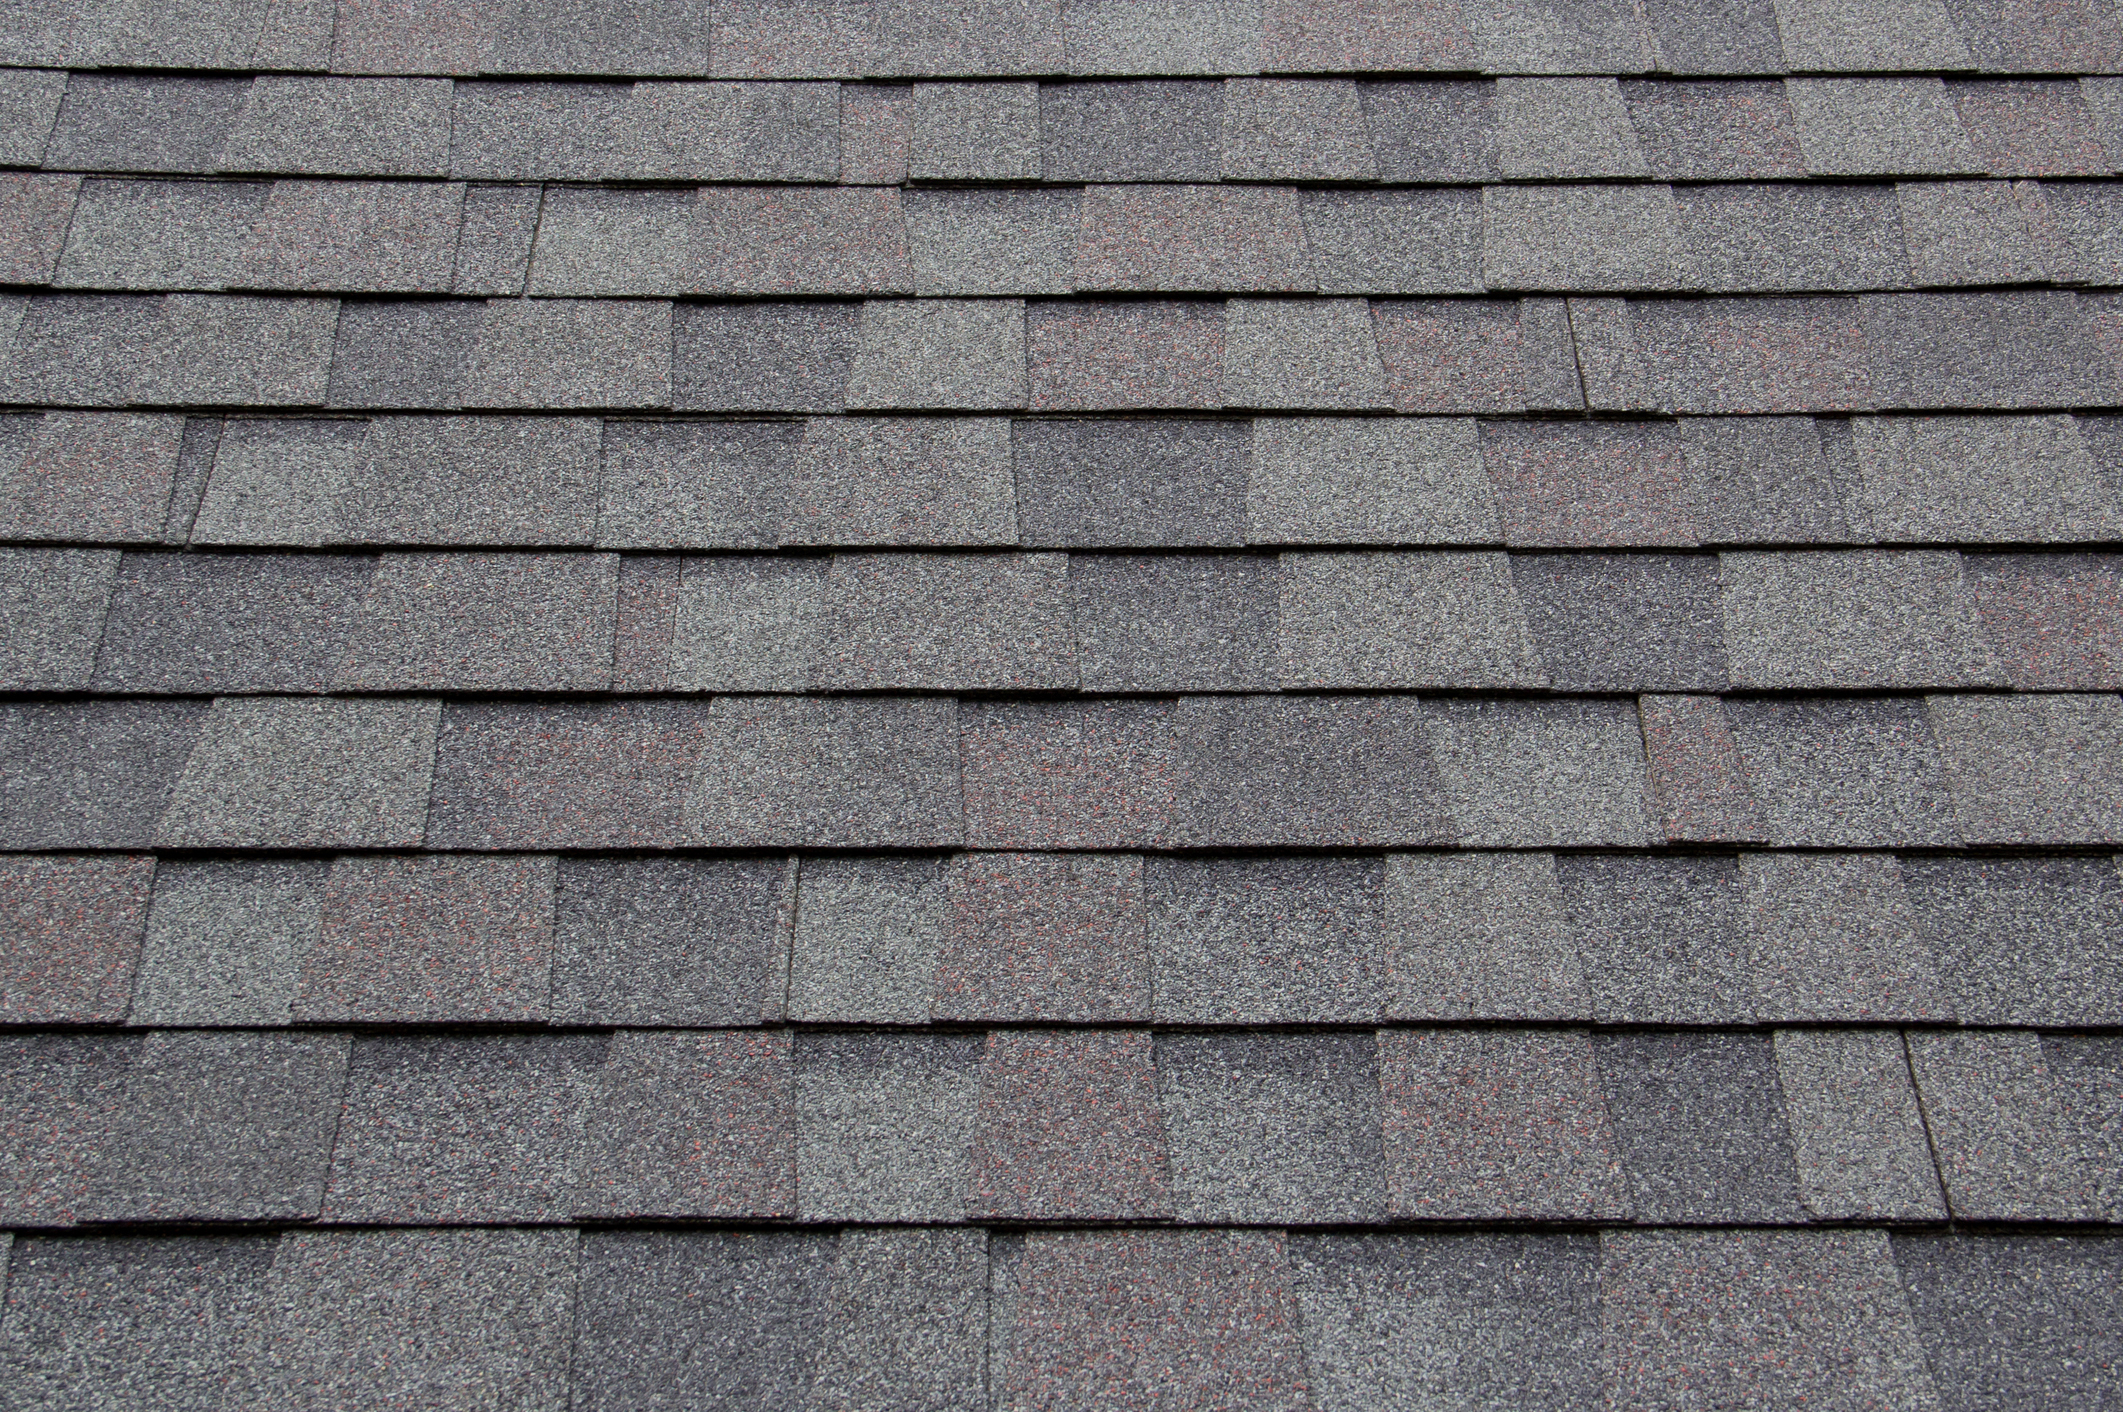 When it comes to shingle replacement in the greater Lexington area, contact Thomas Quality Construction.